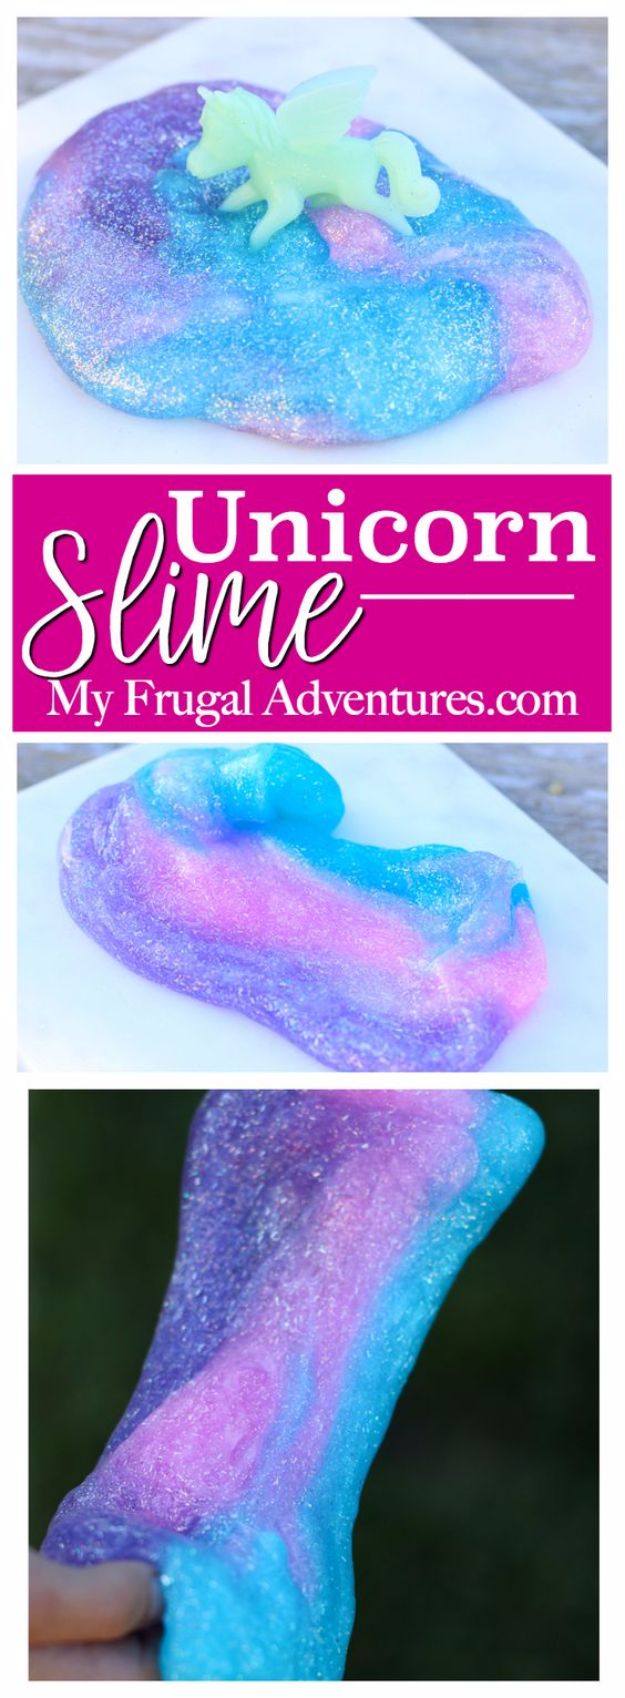 Borax Free Slime Recipes - Easy Unicorn Slime Without Borax - Safe Slimes To Make Without Glue - How To Make Fluffy Slime With Shaving Cream - Easy 3 Ingredients Glitter Slime, Clear, Galaxy, Best DIY Slime Tutorials With Step by Step Instructions #slimerecipes #slime #kidscrafts #teencrafts